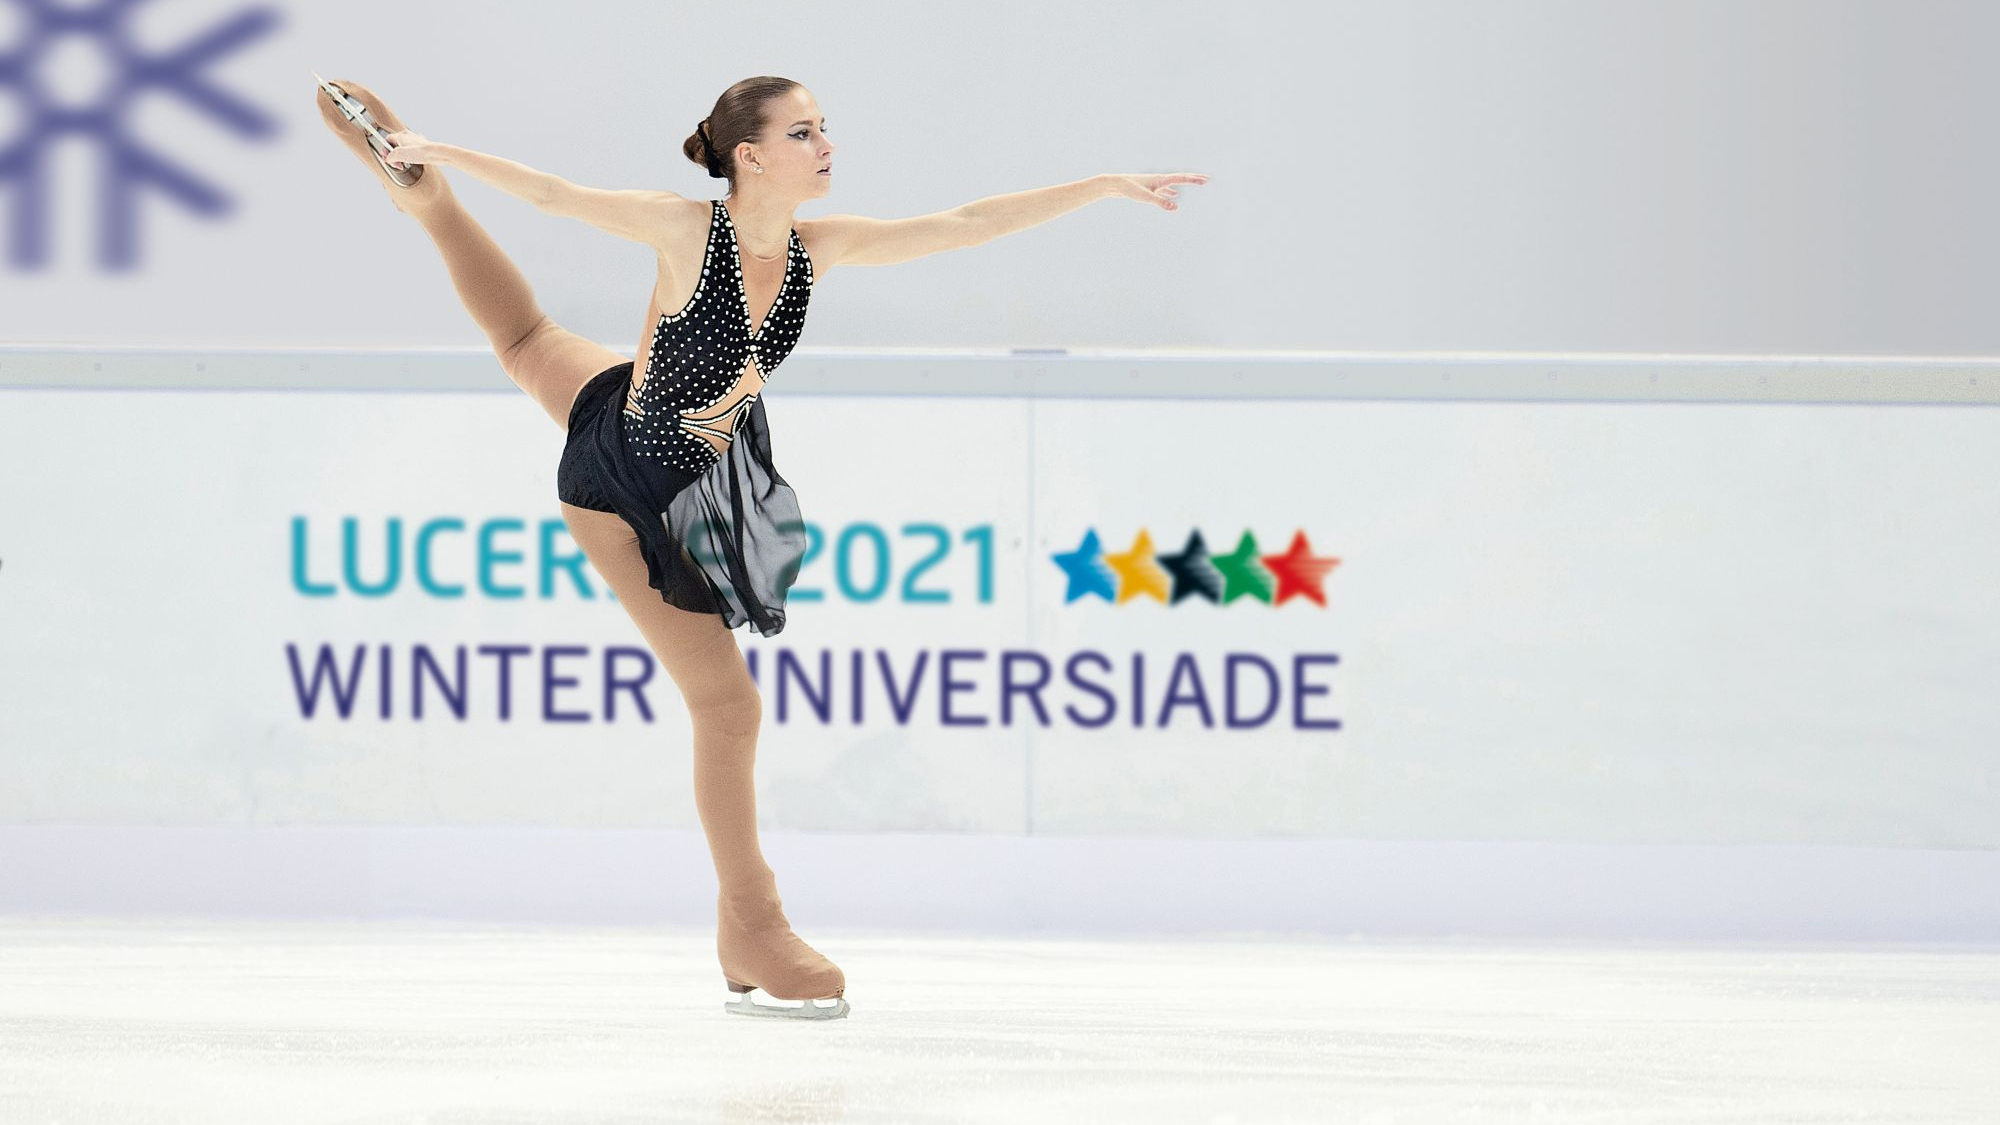 Woman figure skater practices besides a sign for the 2021 Lucerne Winter Universiade